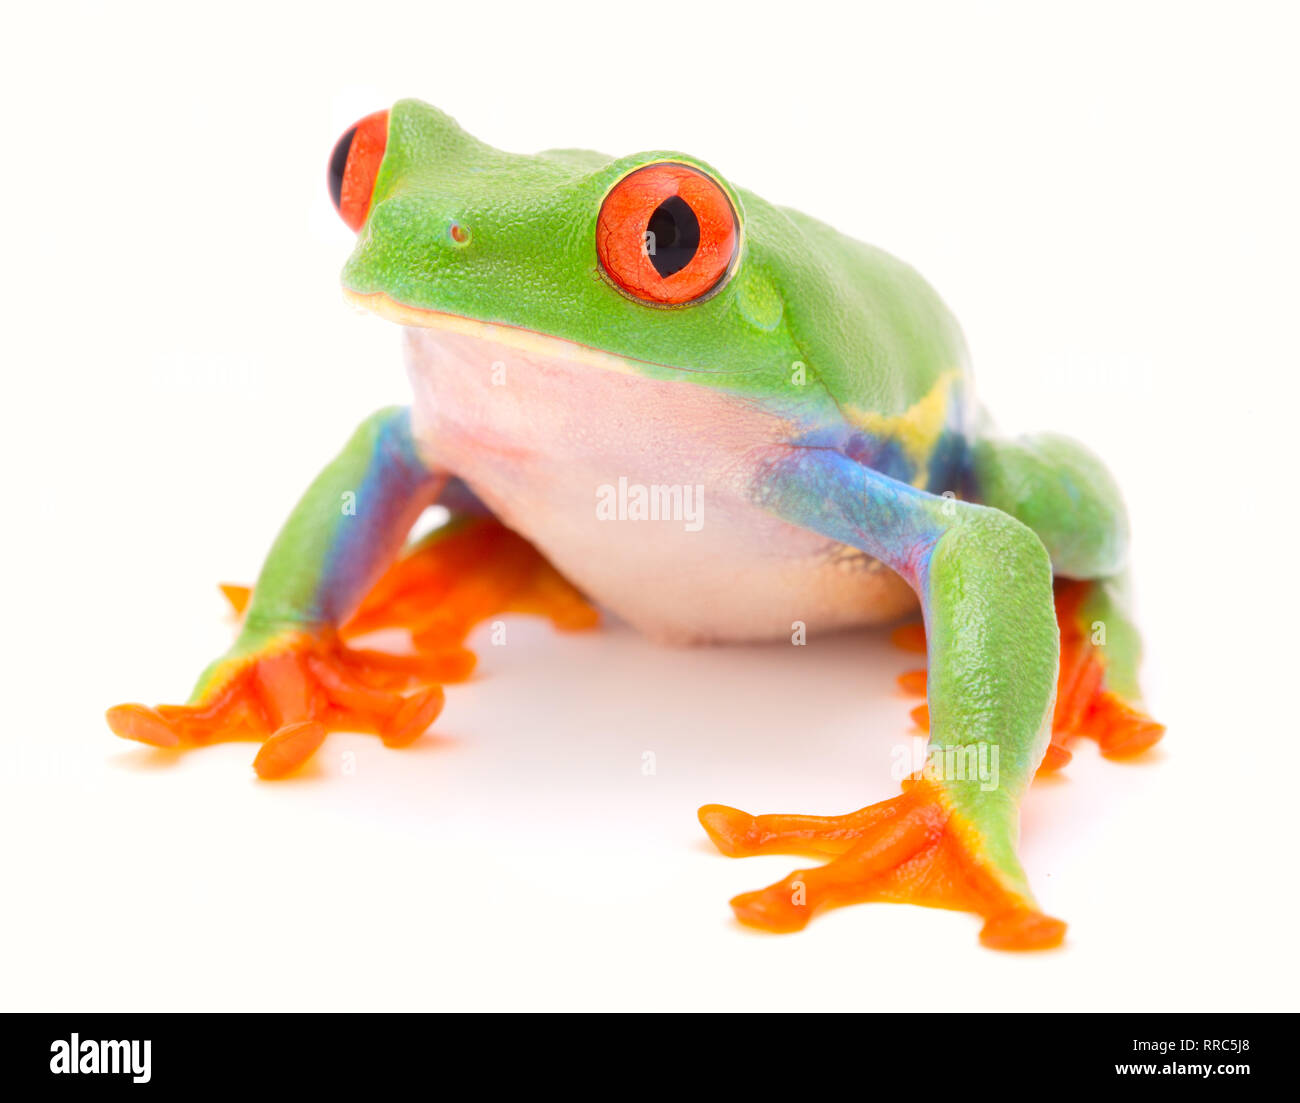 Red eyed monkey tree frog, a tropical animal from the rain forest in Costa Rica isolated on white background. This amphibian is an endangered species  Stock Photo